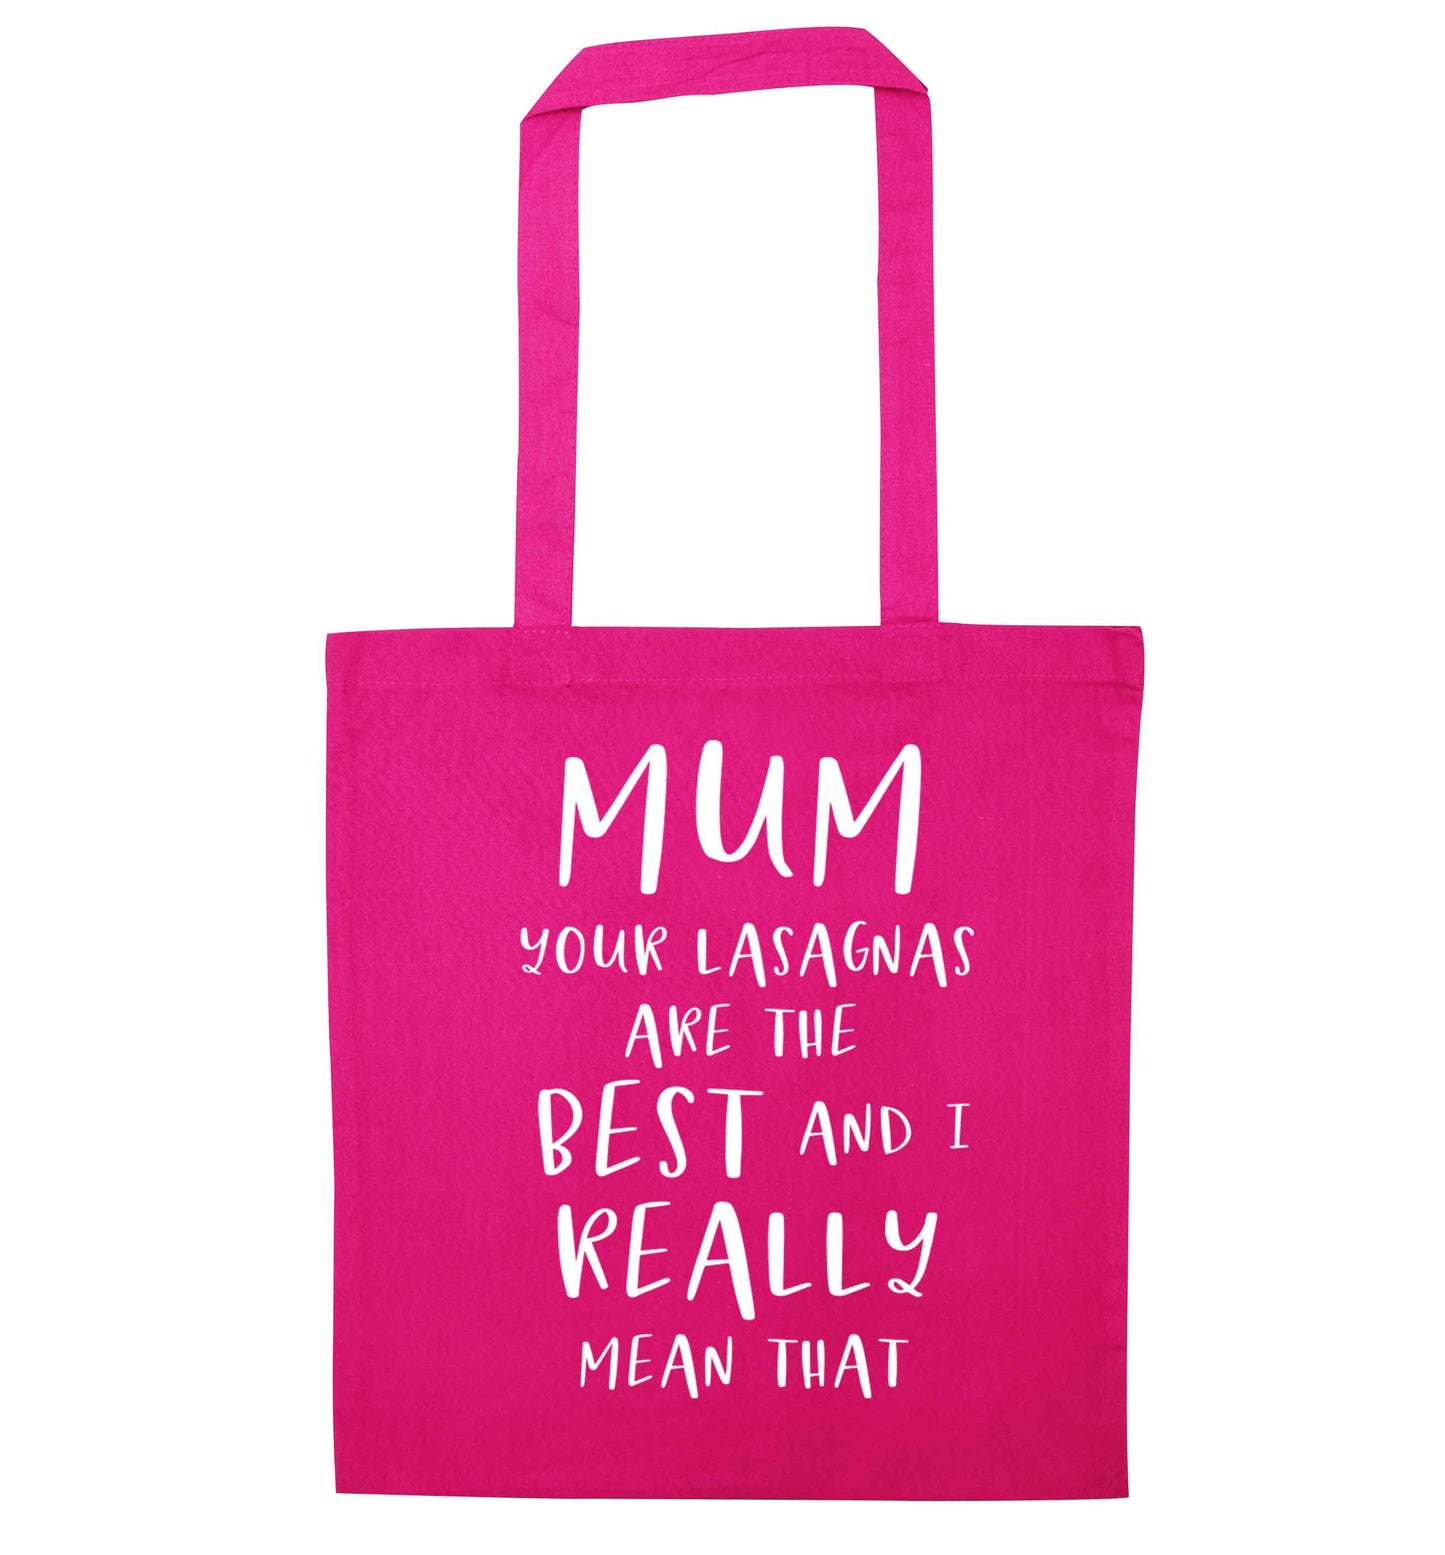 Funny gifts for your mum on mother's dayor her birthday! Mum your lasagnas are the best and I really mean that pink tote bag